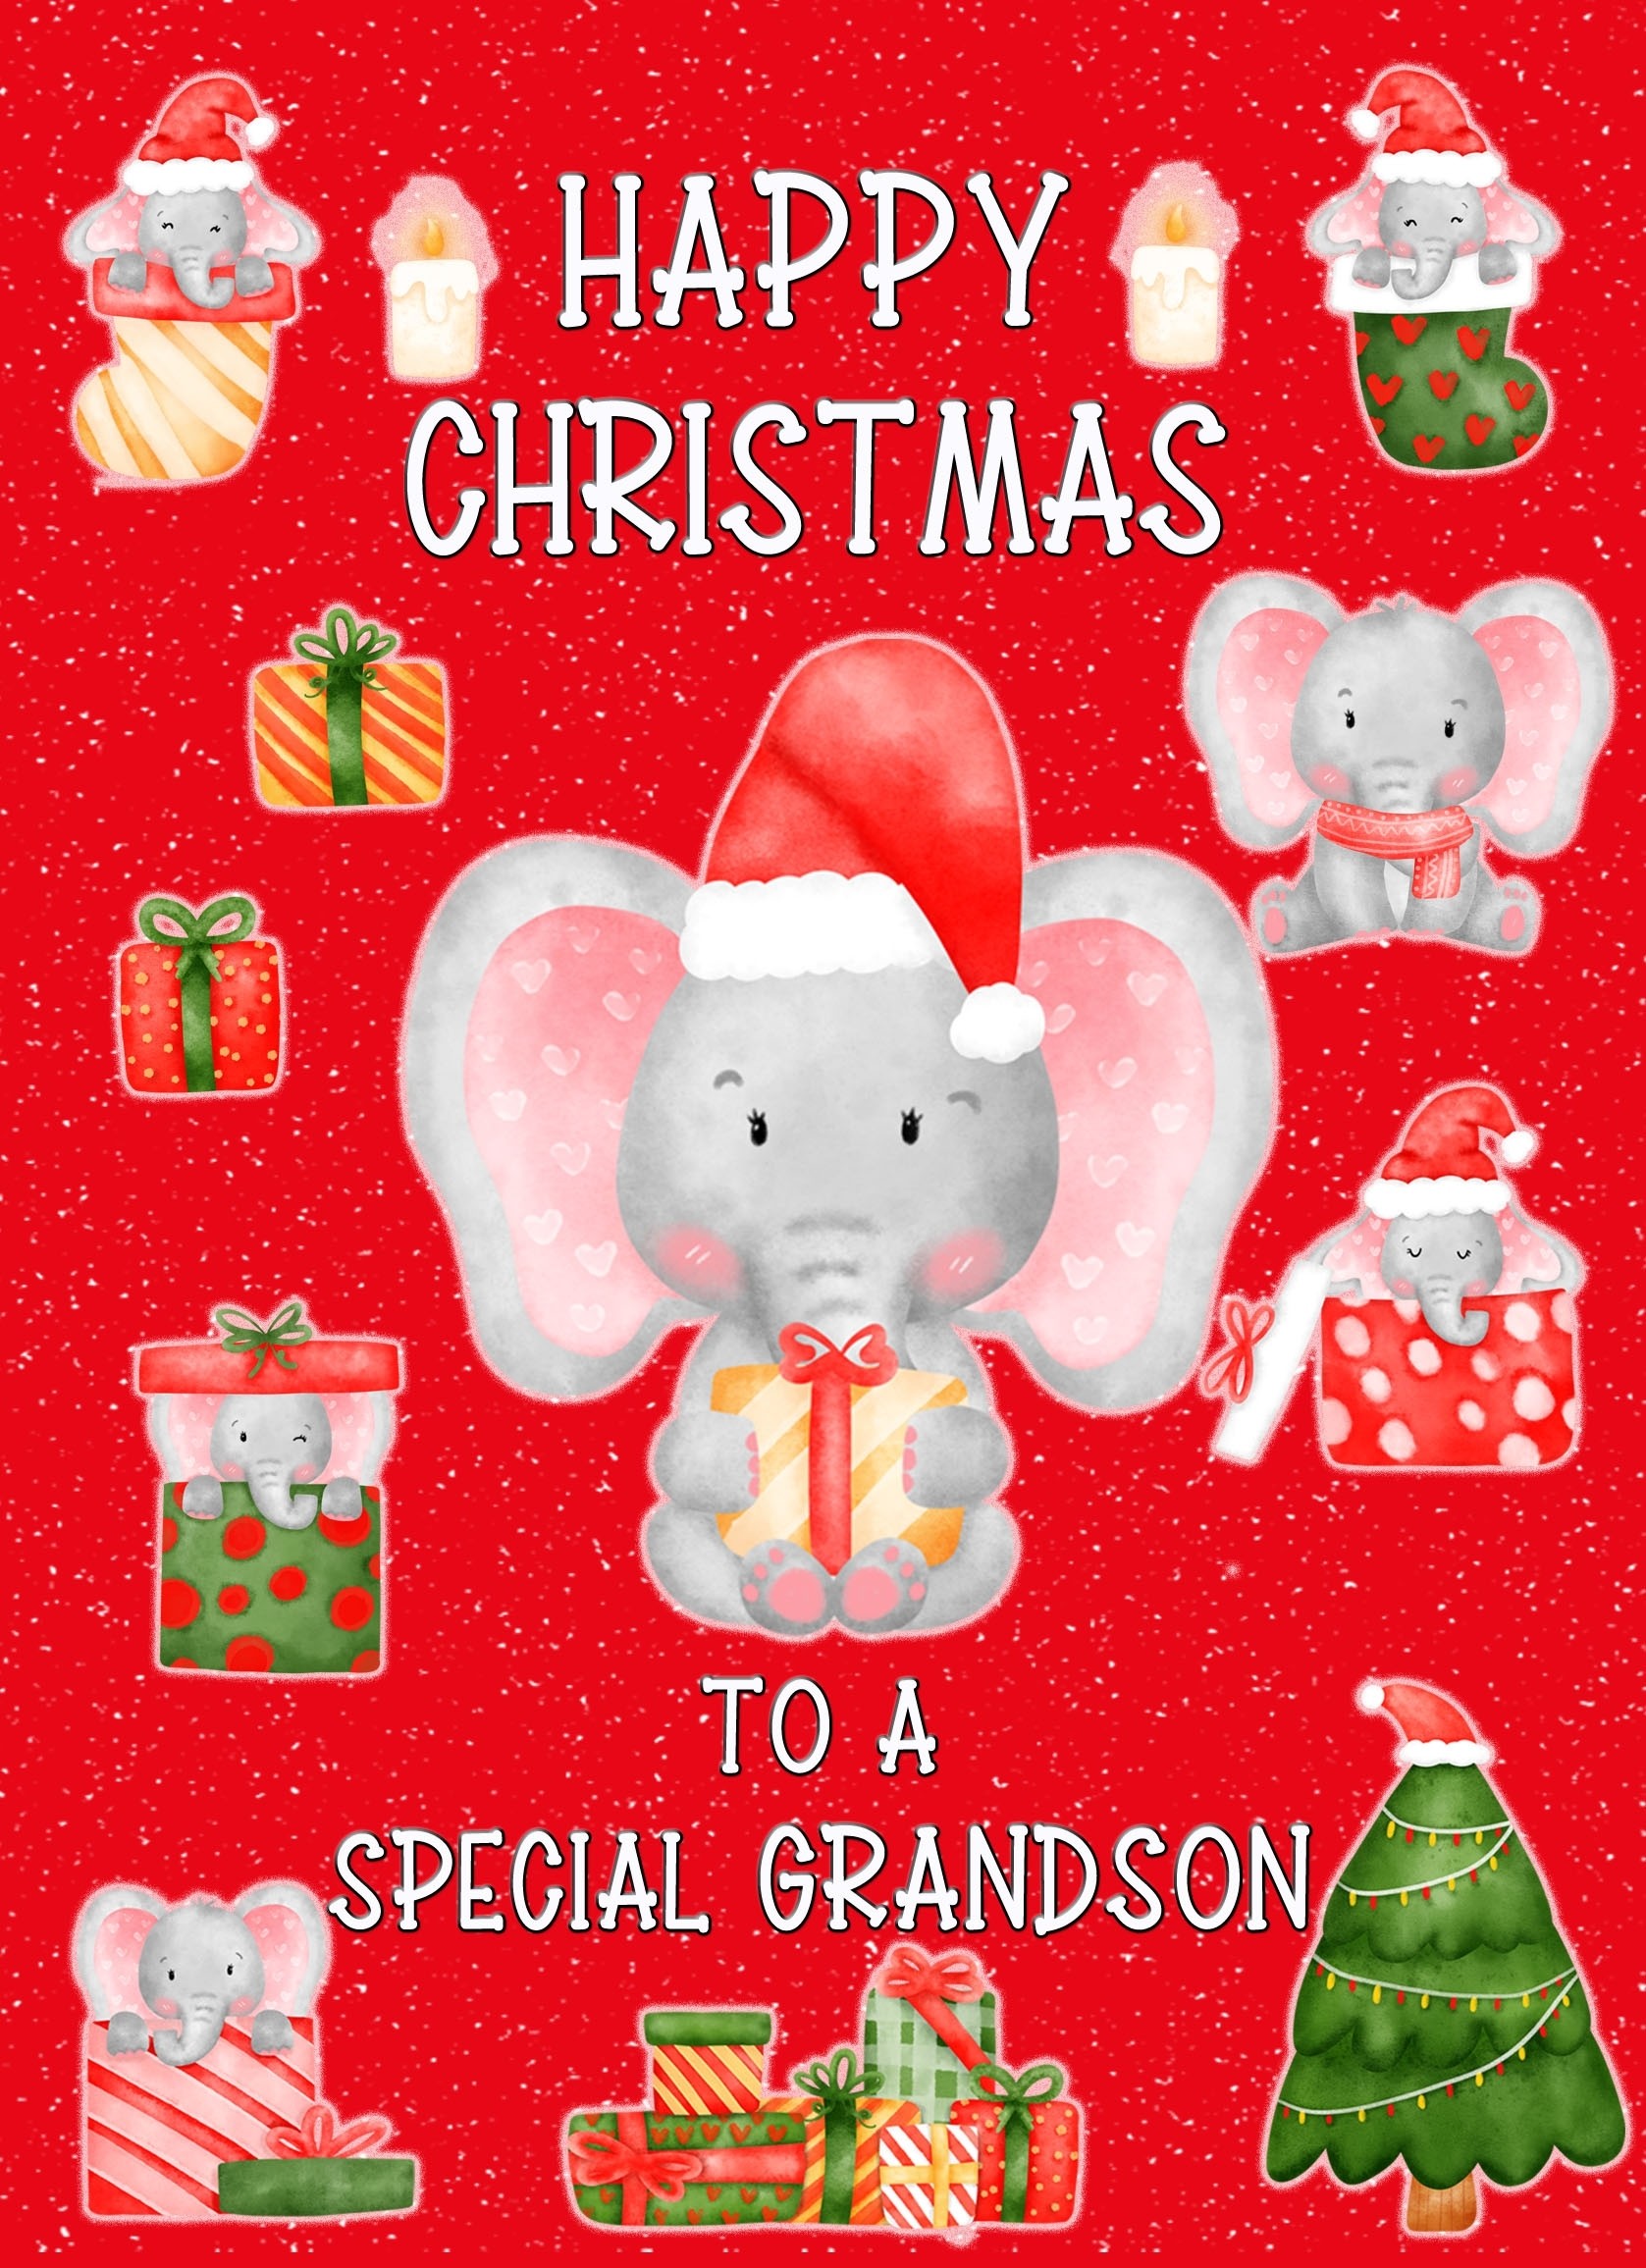 Christmas Card For Special Grandson (Red)